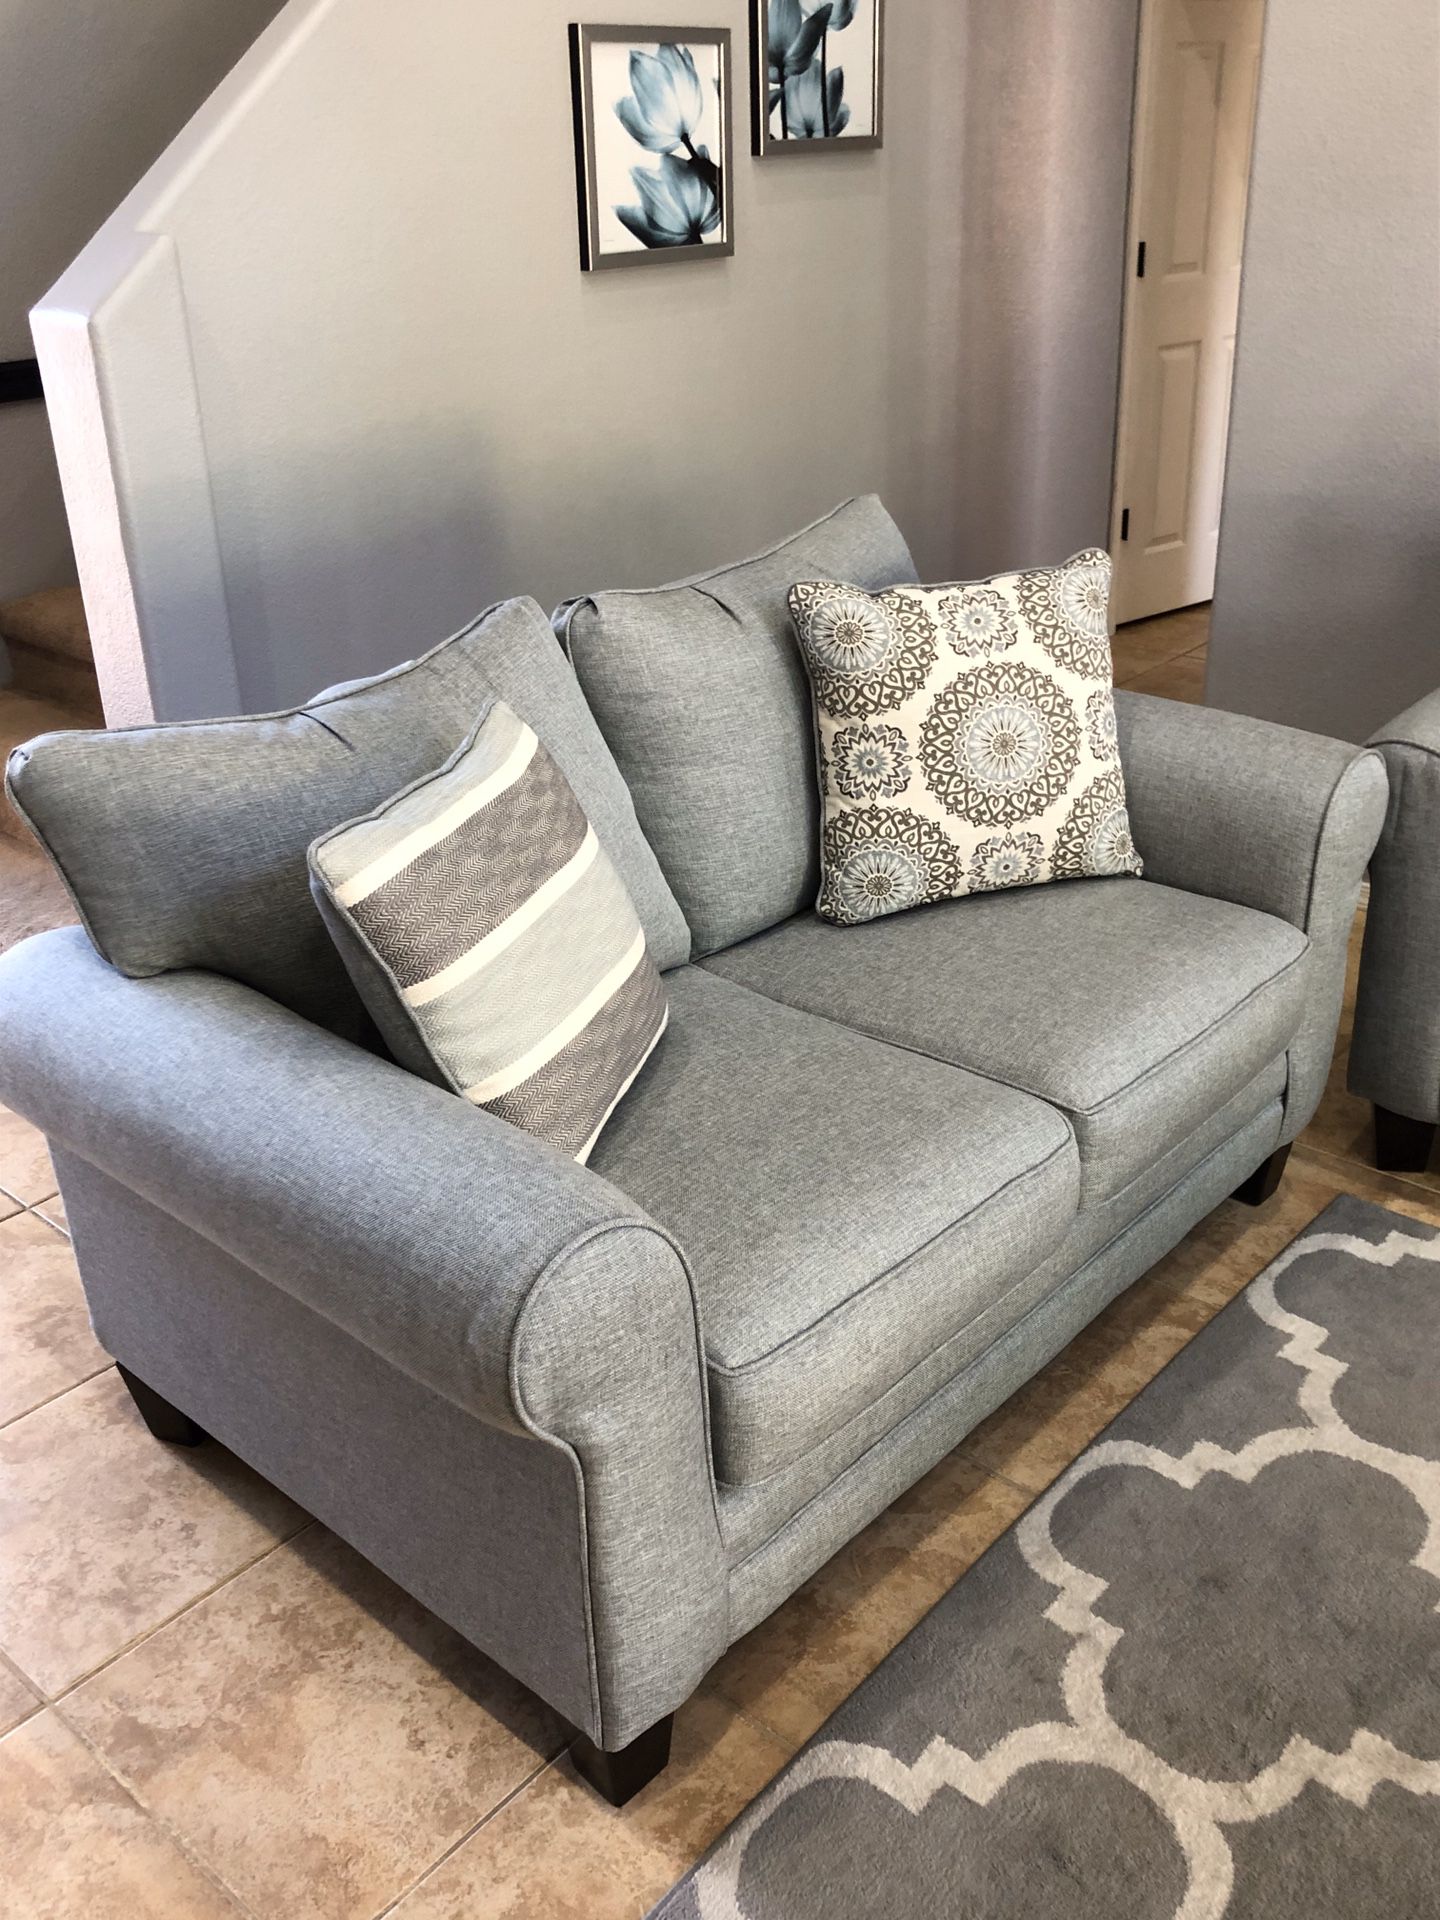 Brand new living room set from American Furniture Warehouse